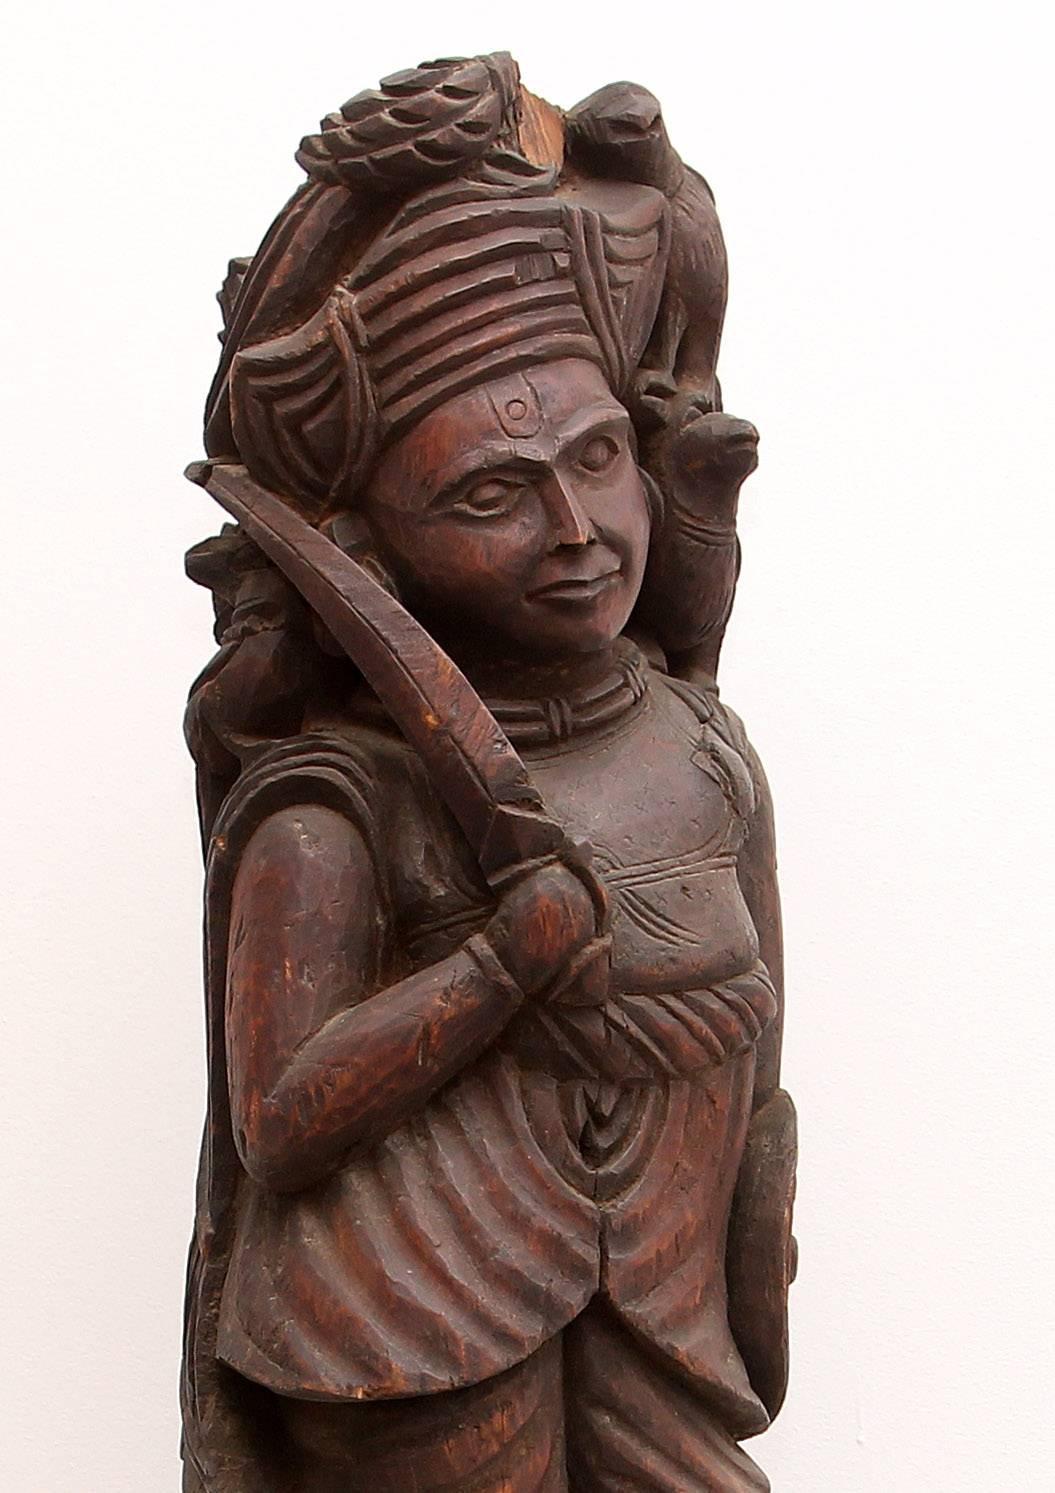 Exotic carved teak sculpture. The sentinel with his sword drawn. 19th century architectural artifact.